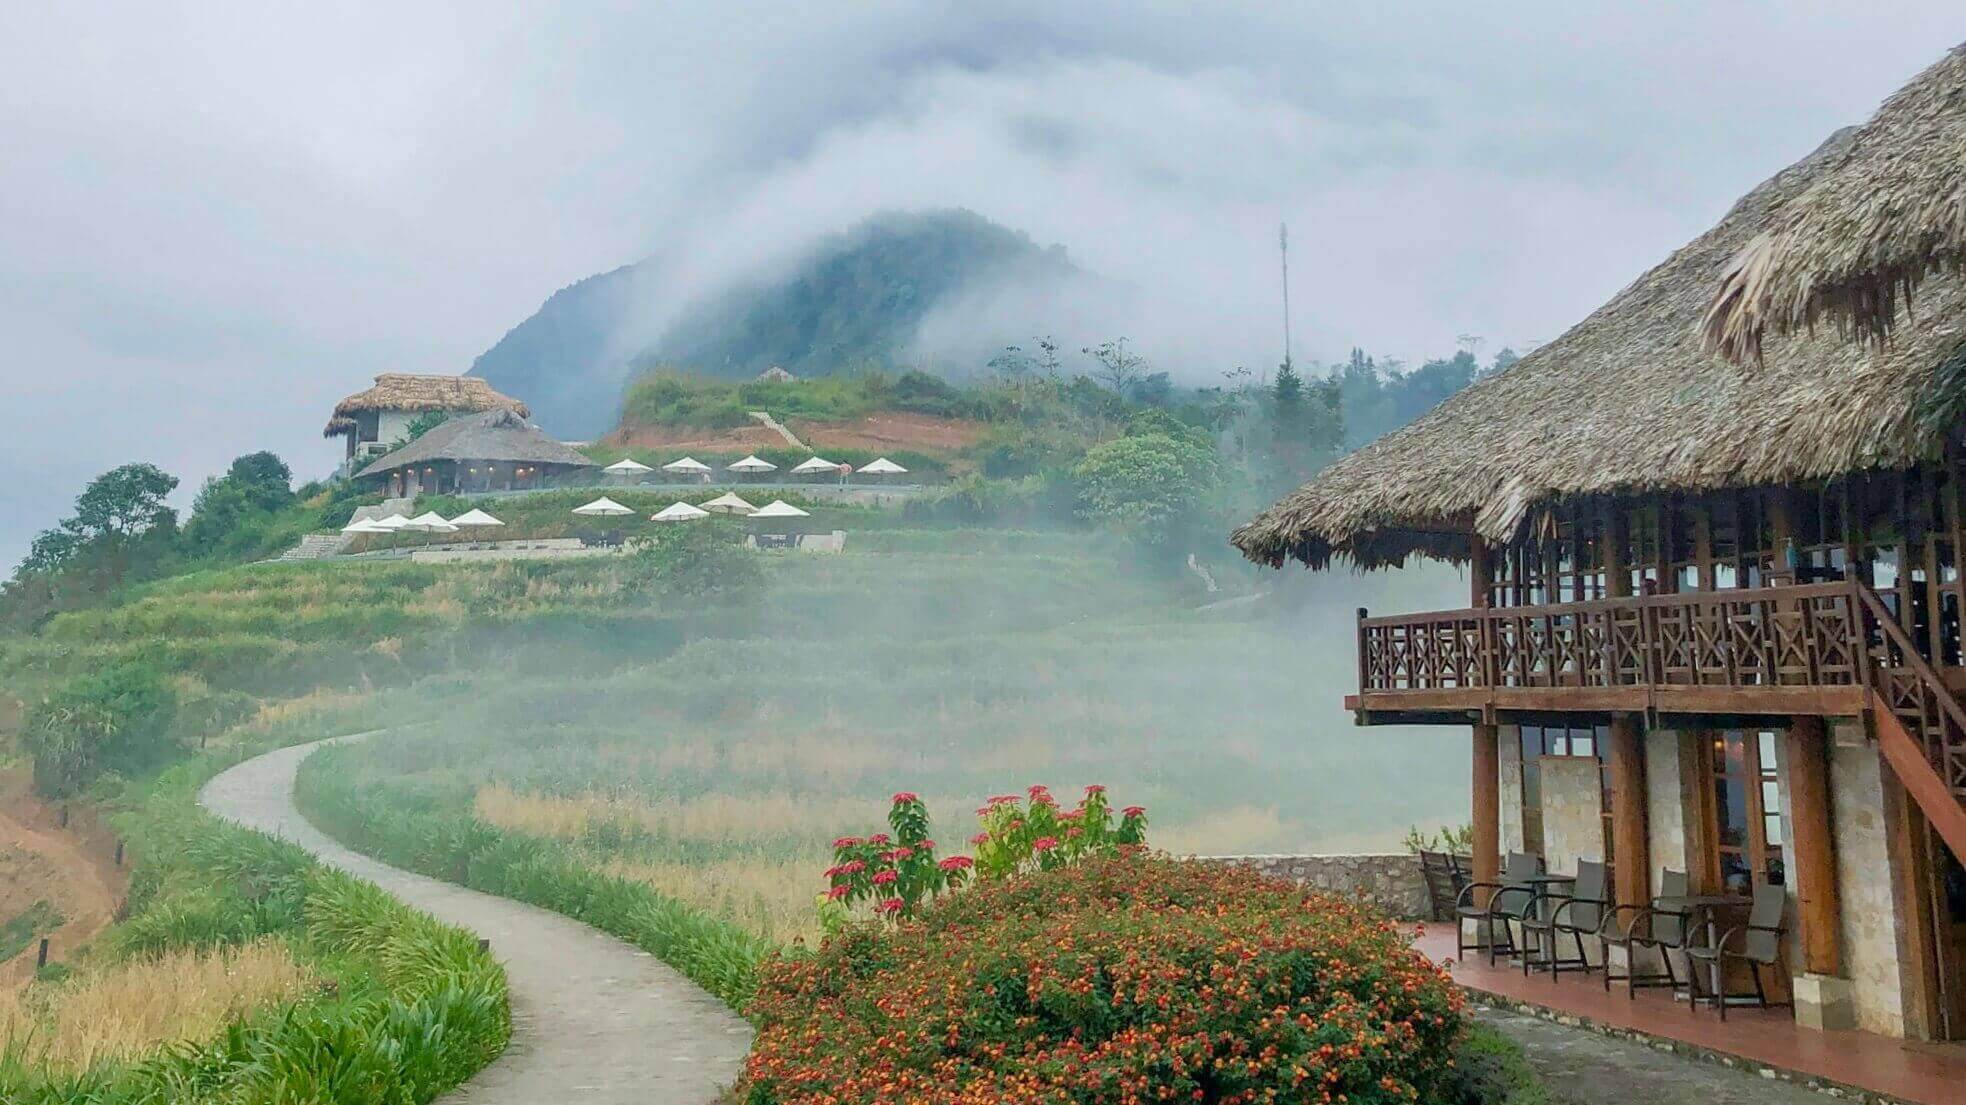 My Visit to the Wonderful Sapa and Topas Ecolodge for the First Time